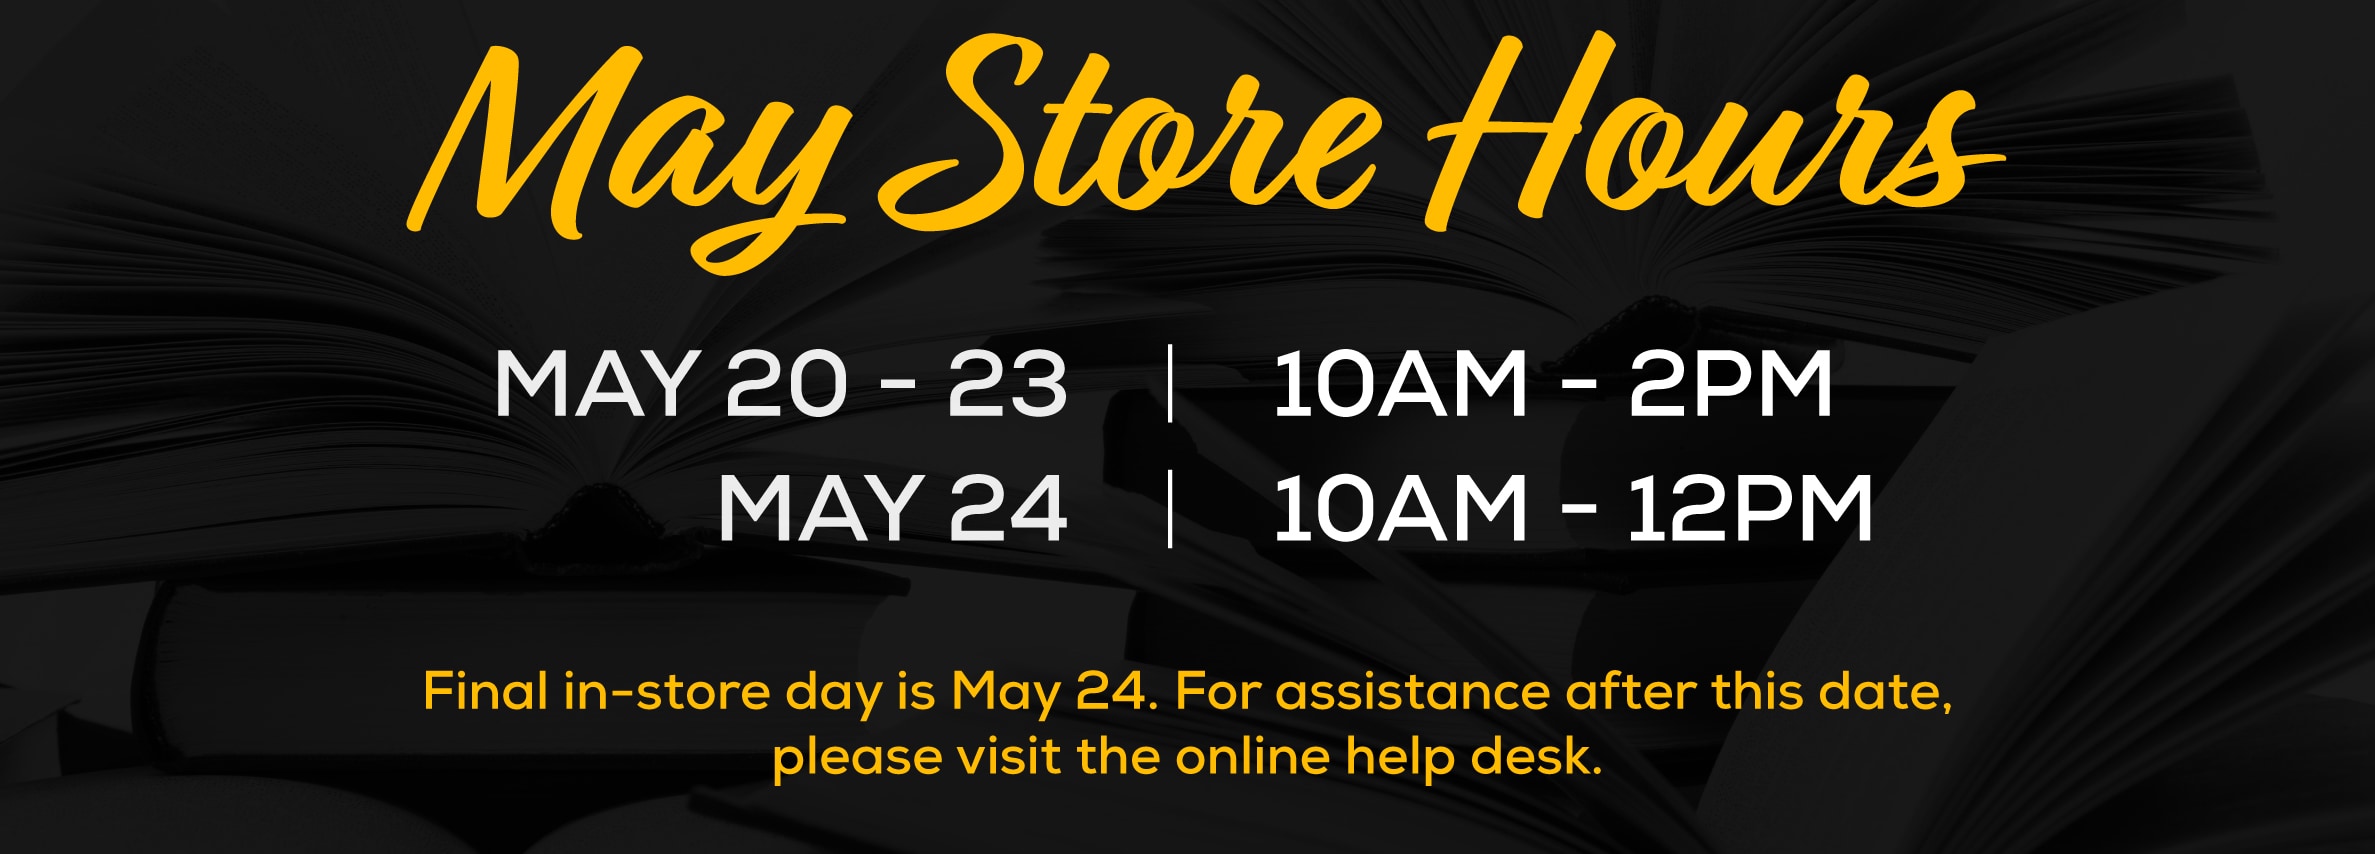 May Store Hours May 20-23 | 10am - 2pm, May 24 | 10am-12pm. Final in-store day is May 24. For assistance after this date, please visit the online help desk.